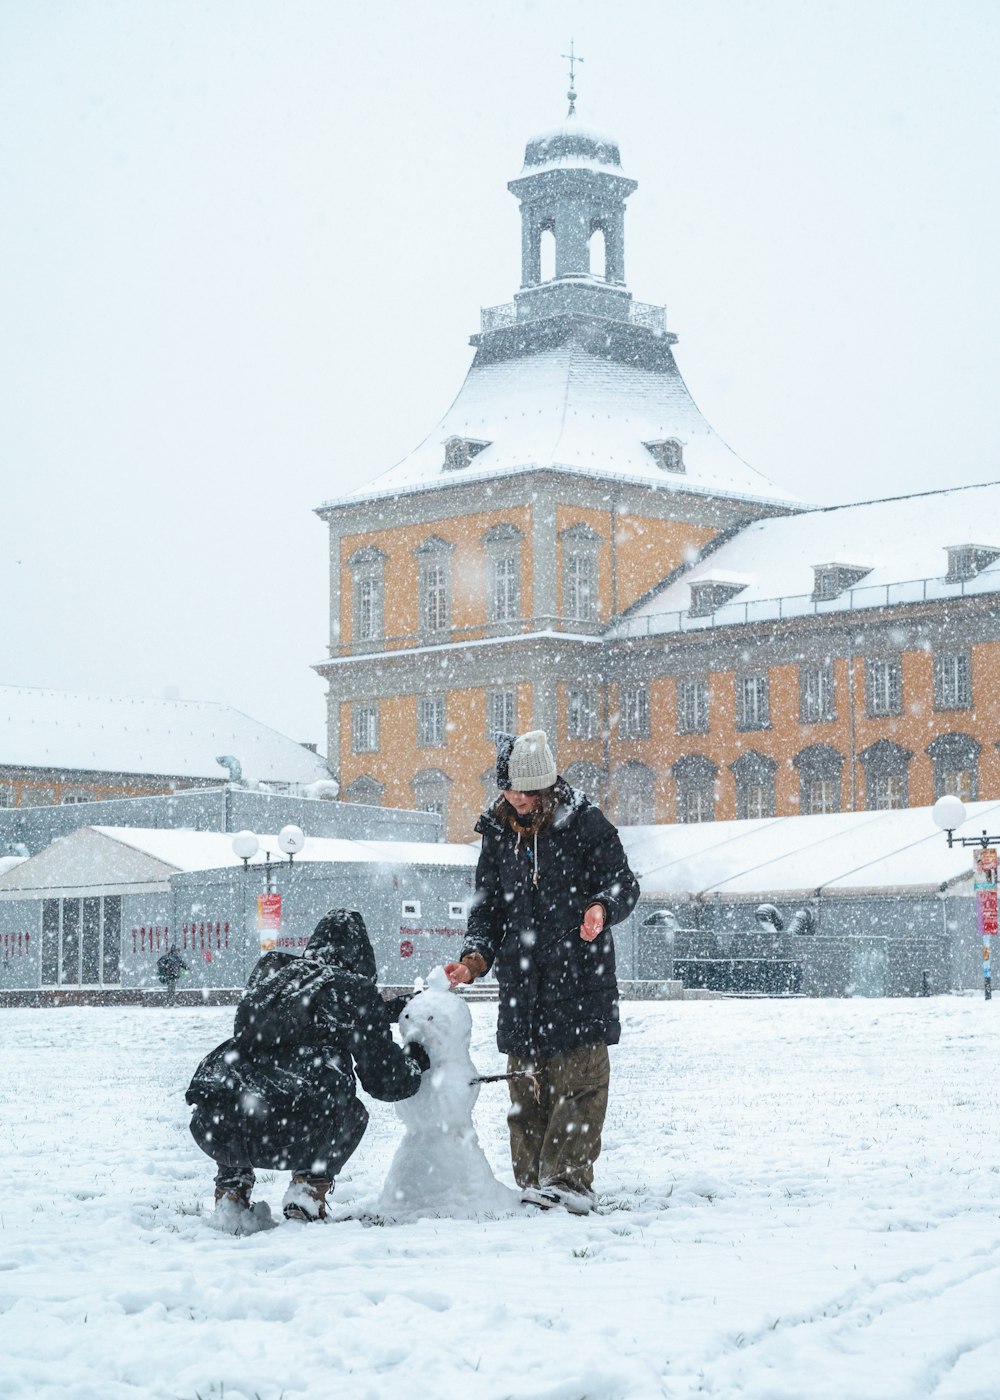 two people building a snowman in front of a building